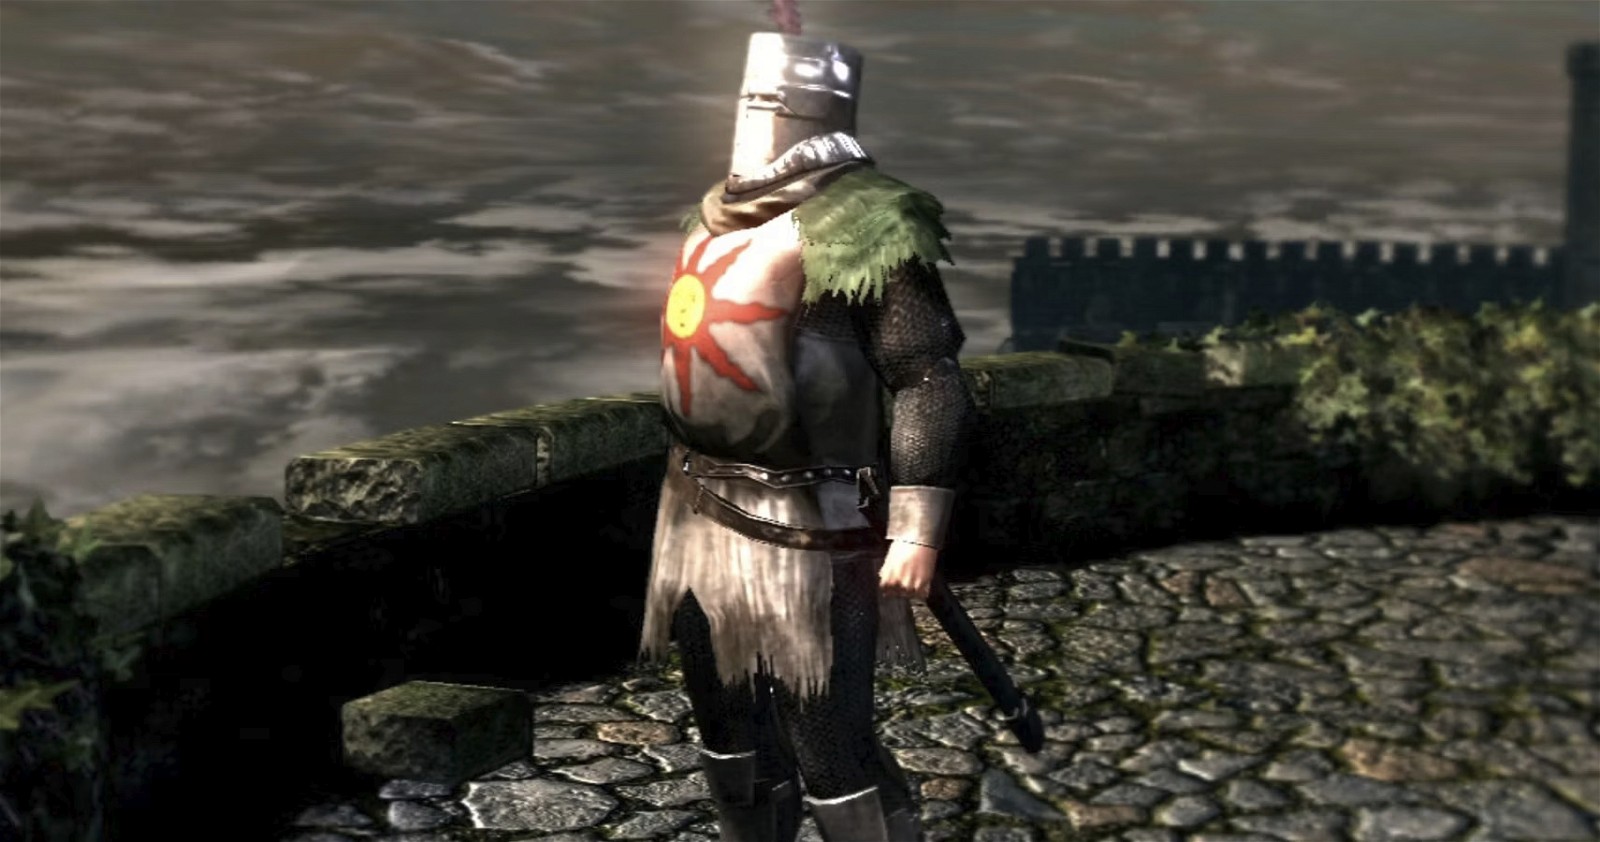 Dark Souls' merry Solaire exhibits peculiar cues that fueled the speculation. Image credit: FromSoftware